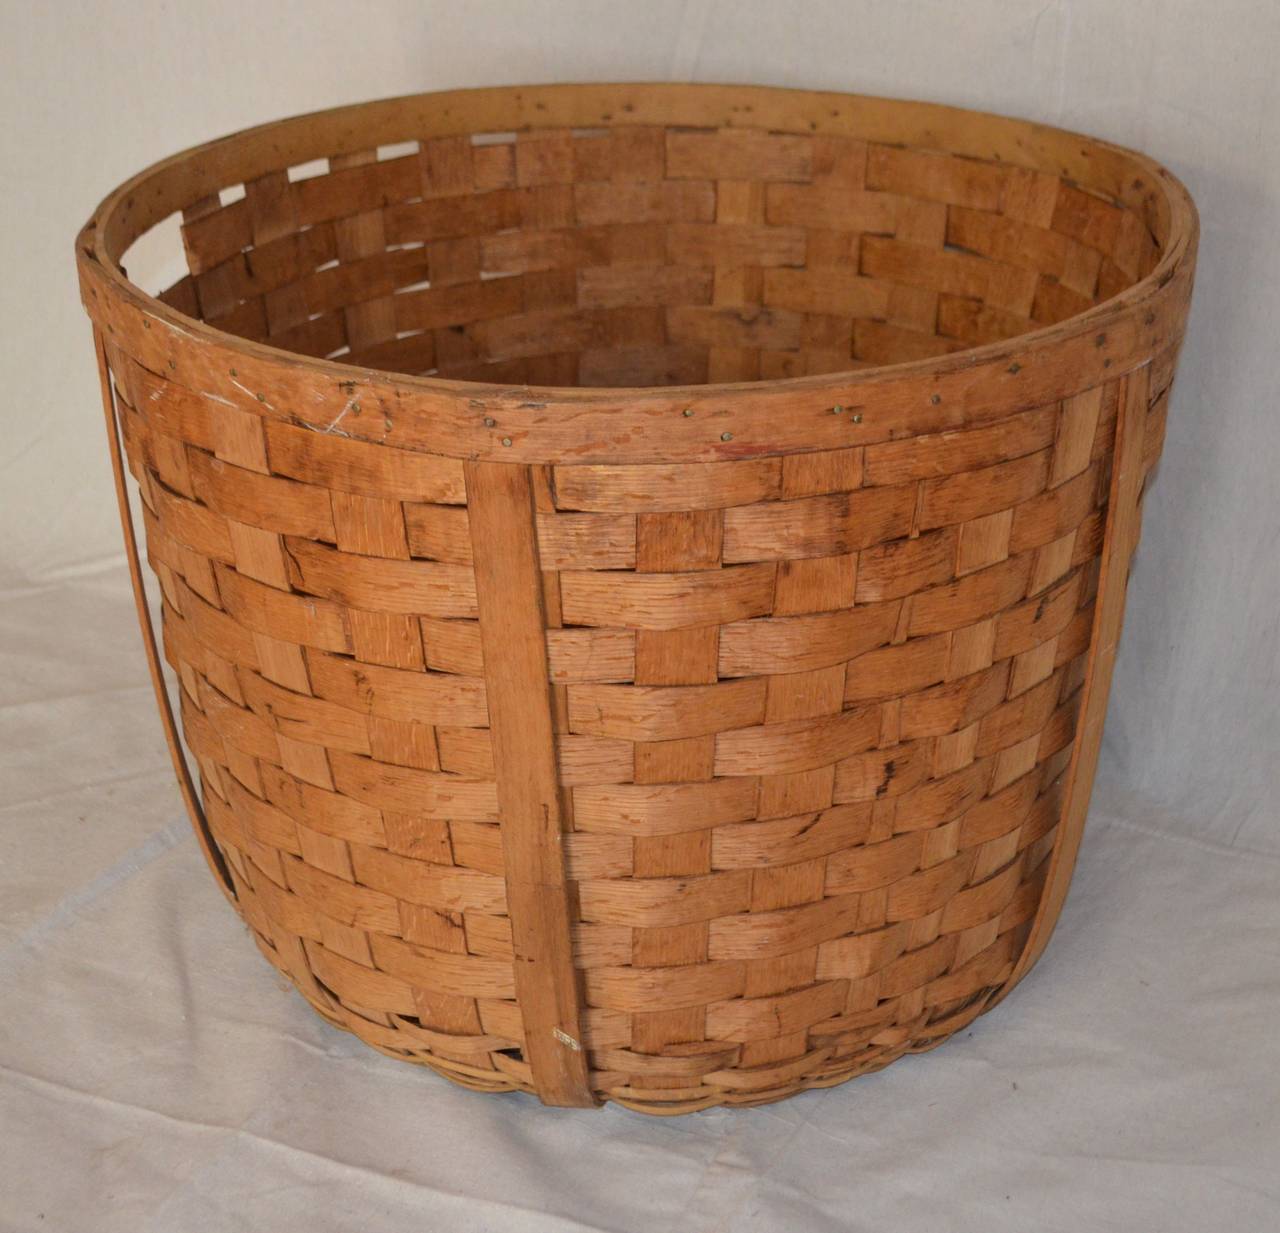 20th Century Basket of Woven Wooden Slats with Cut-Out Handles, 27-inch Diameter